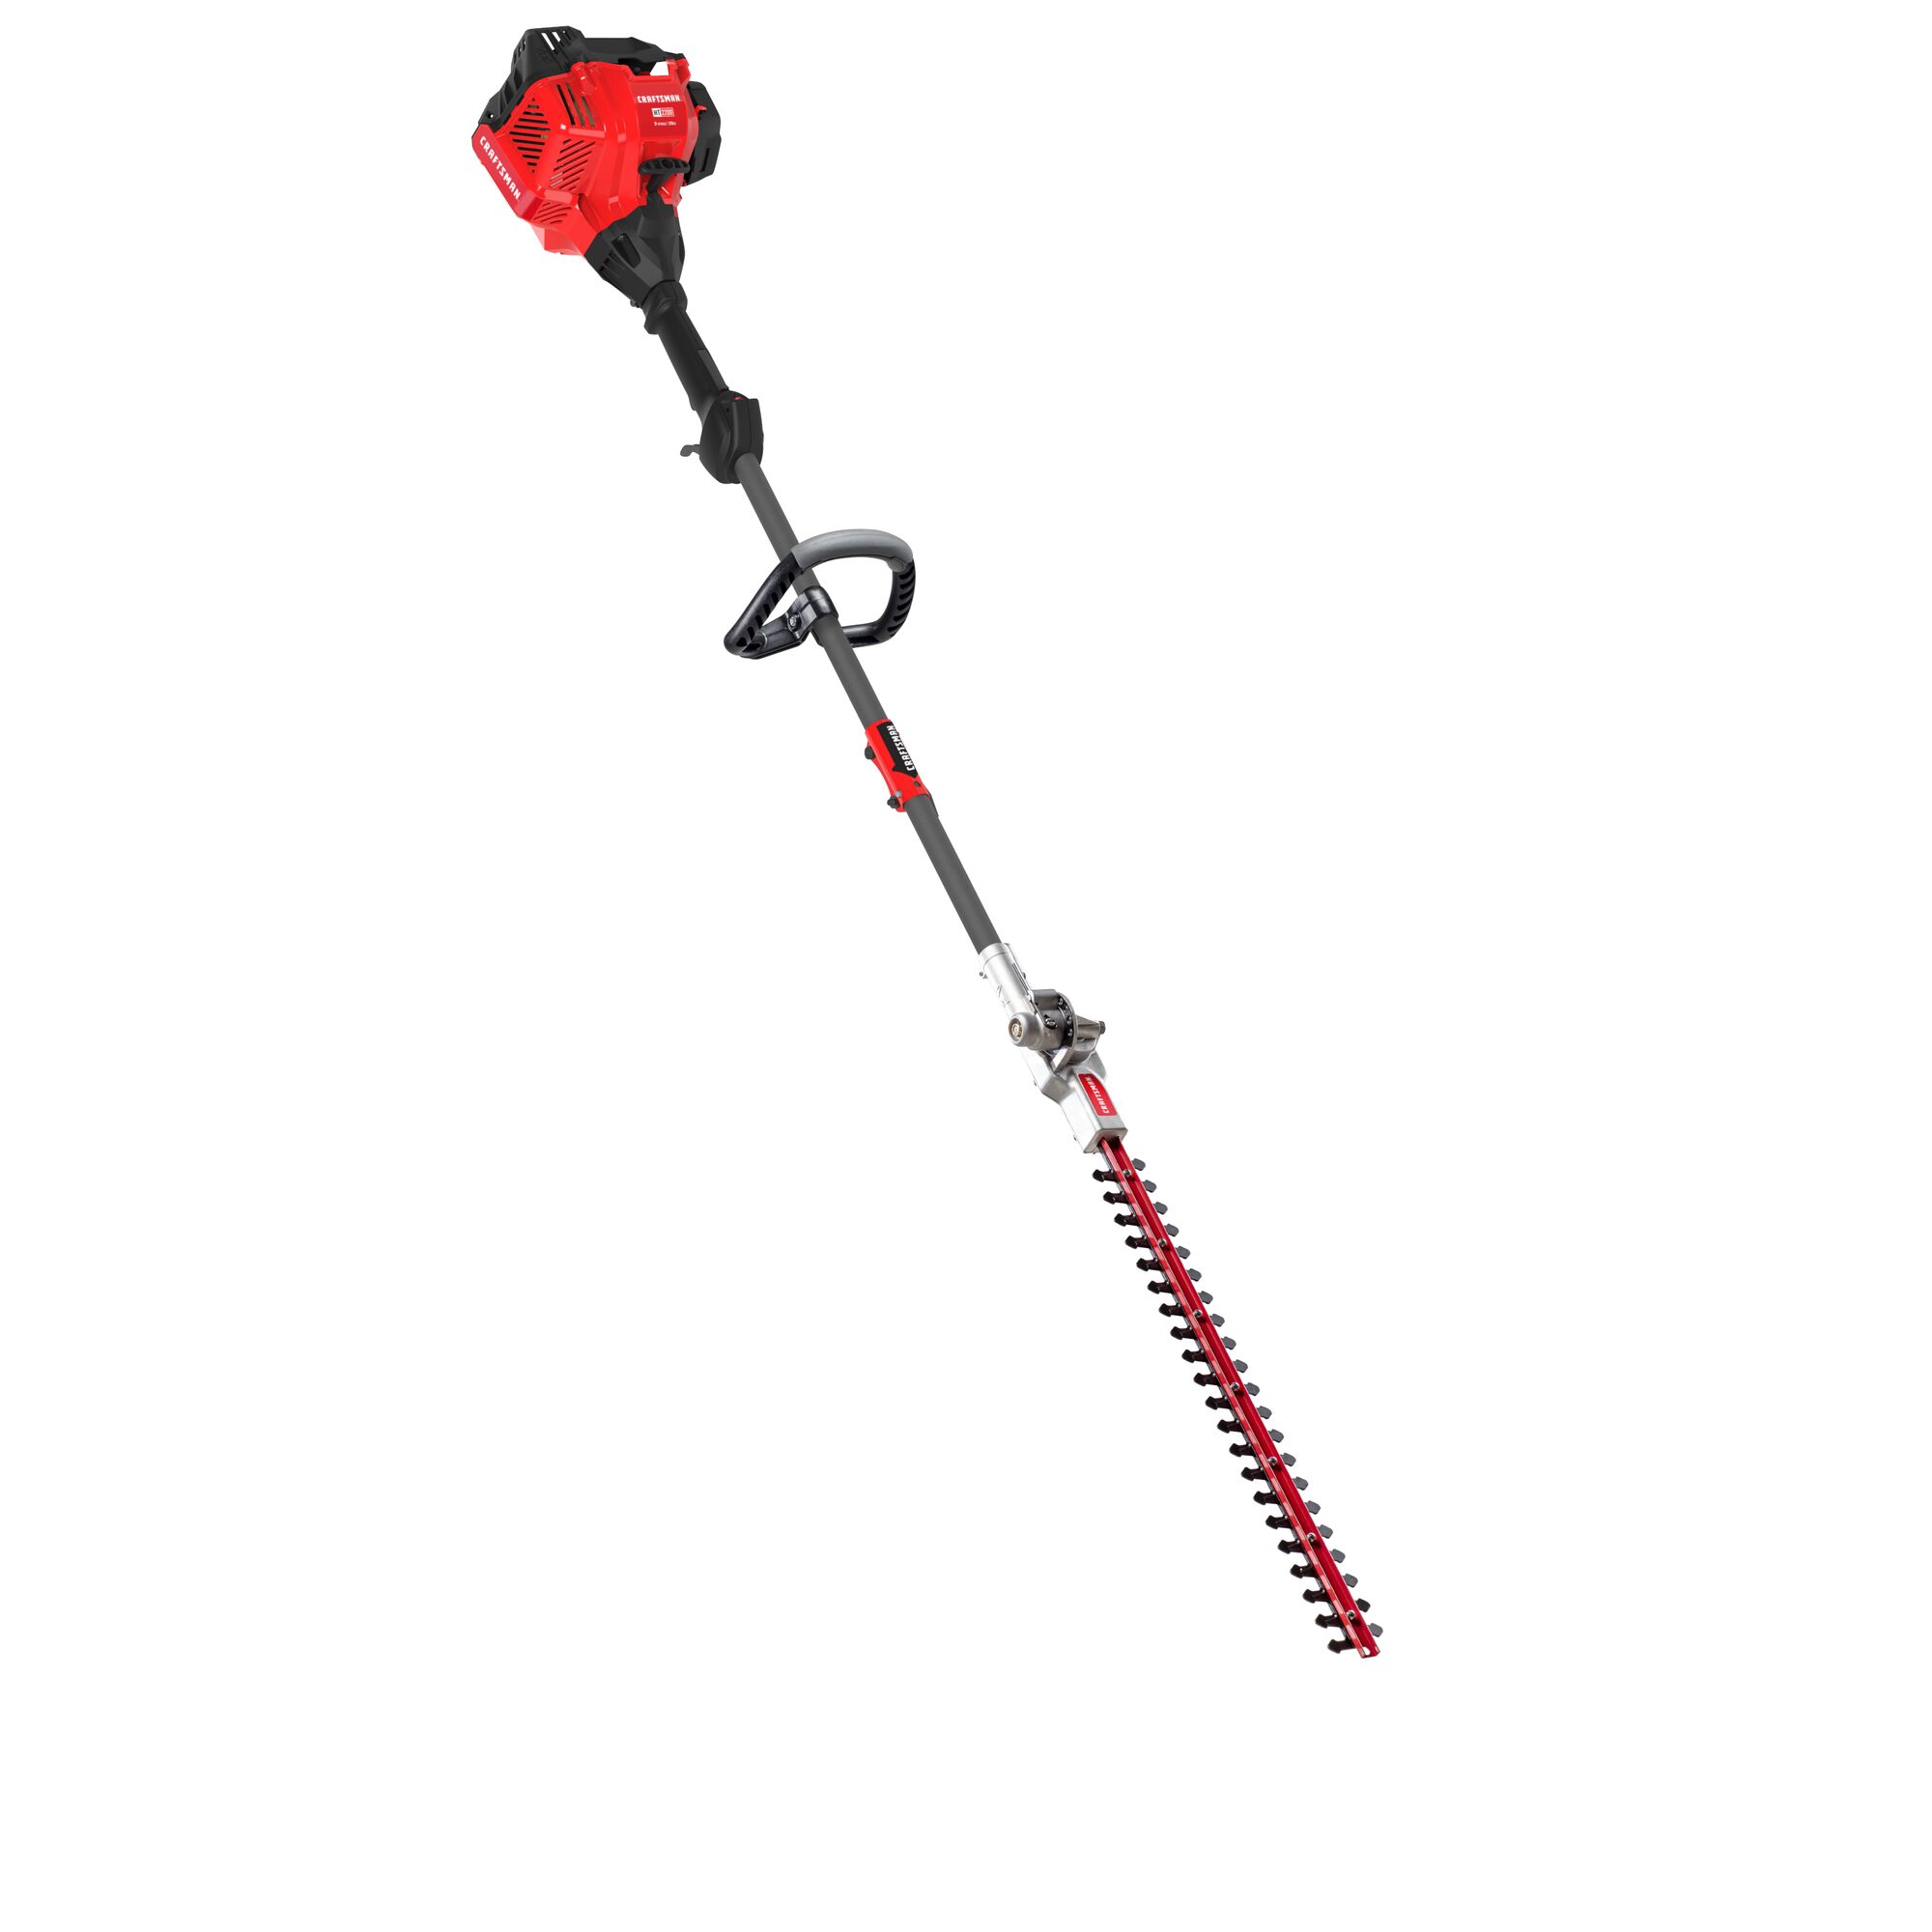 CRAFTSMAN HT2200 Gas Pole Hedge Trimmer on white background